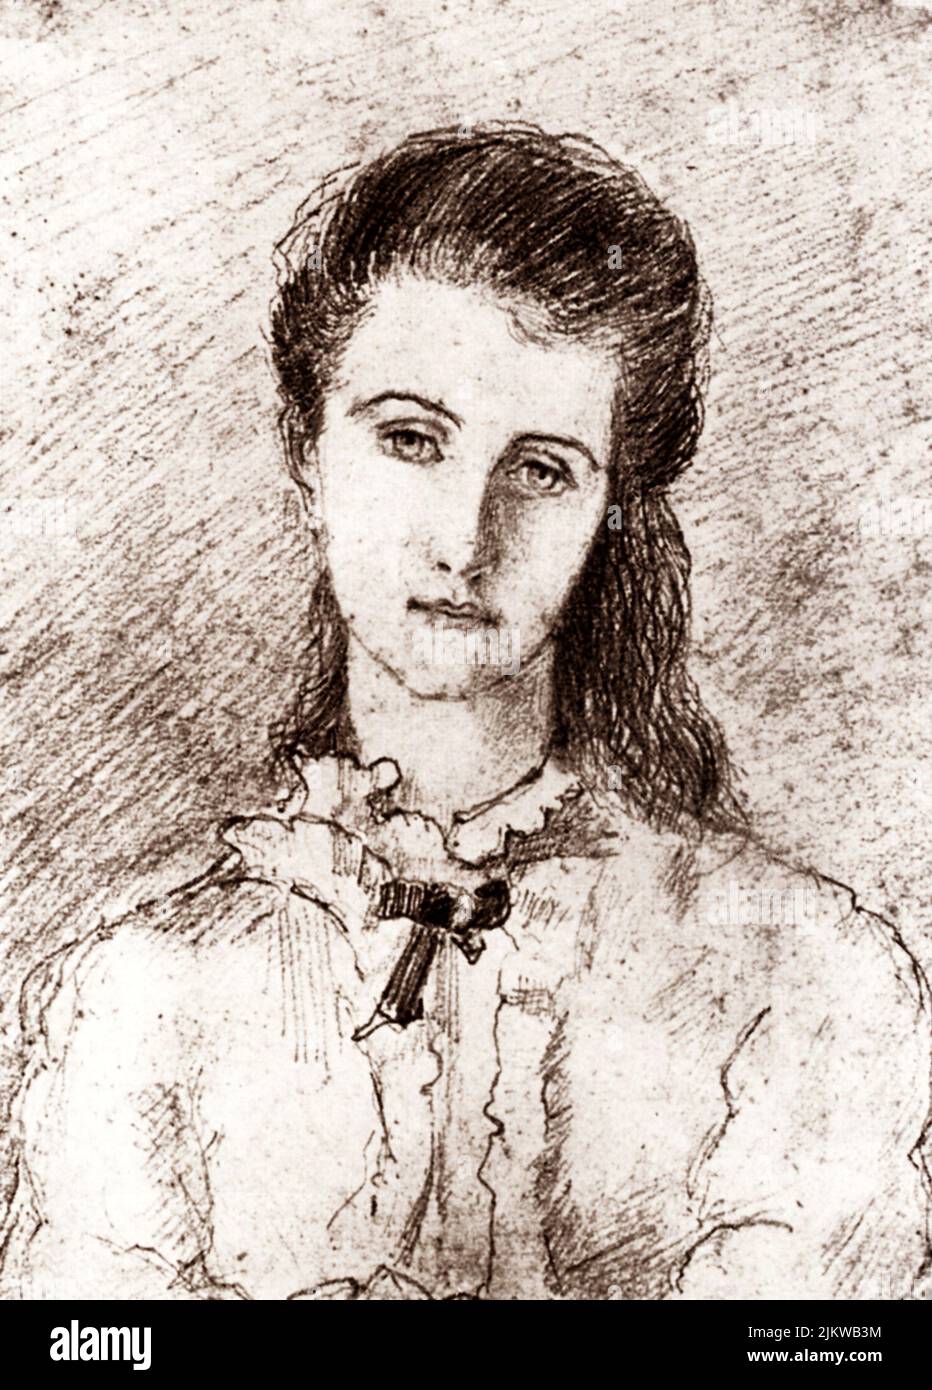 1877 , Oxford , England   :  FLORENCE BALCOMBE , the first love of  celebrated irish writer and dramatist OSCAR WILDE ( 1854 - 1900 ), portrait sketched by him   - SCRITTORE - LETTERATURA - LITERATURE - POET - POETA - POESIA - DRAMMATURGO - playwriter - play-writer - TEATRO - THEATER - THEATRE  - POETRY   ----  Archivio GBB Stock Photo